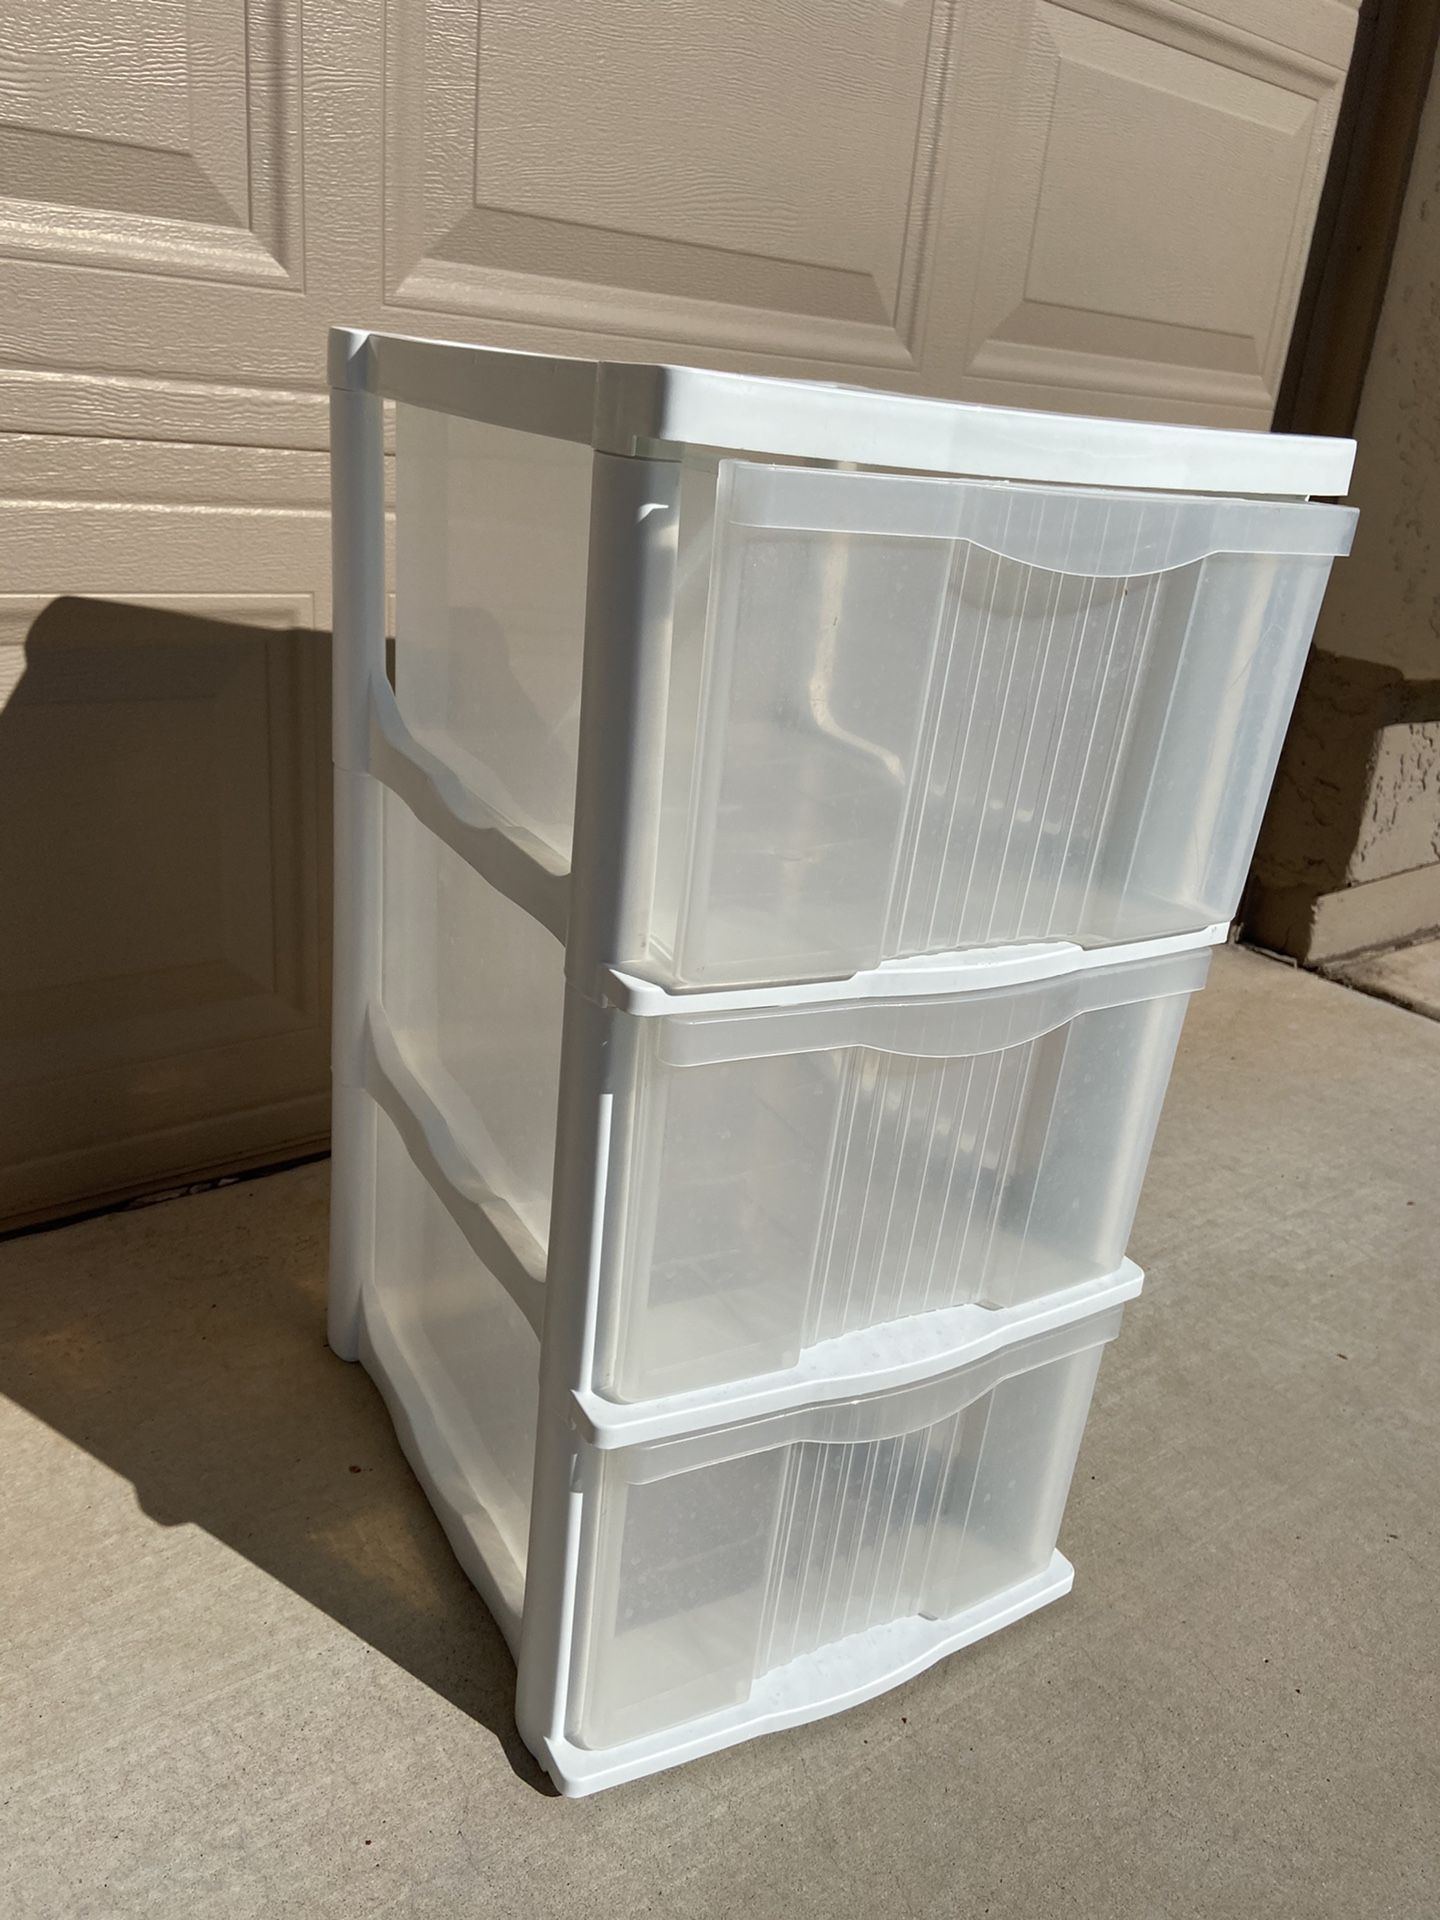 Plastic 3 drawers with wheels